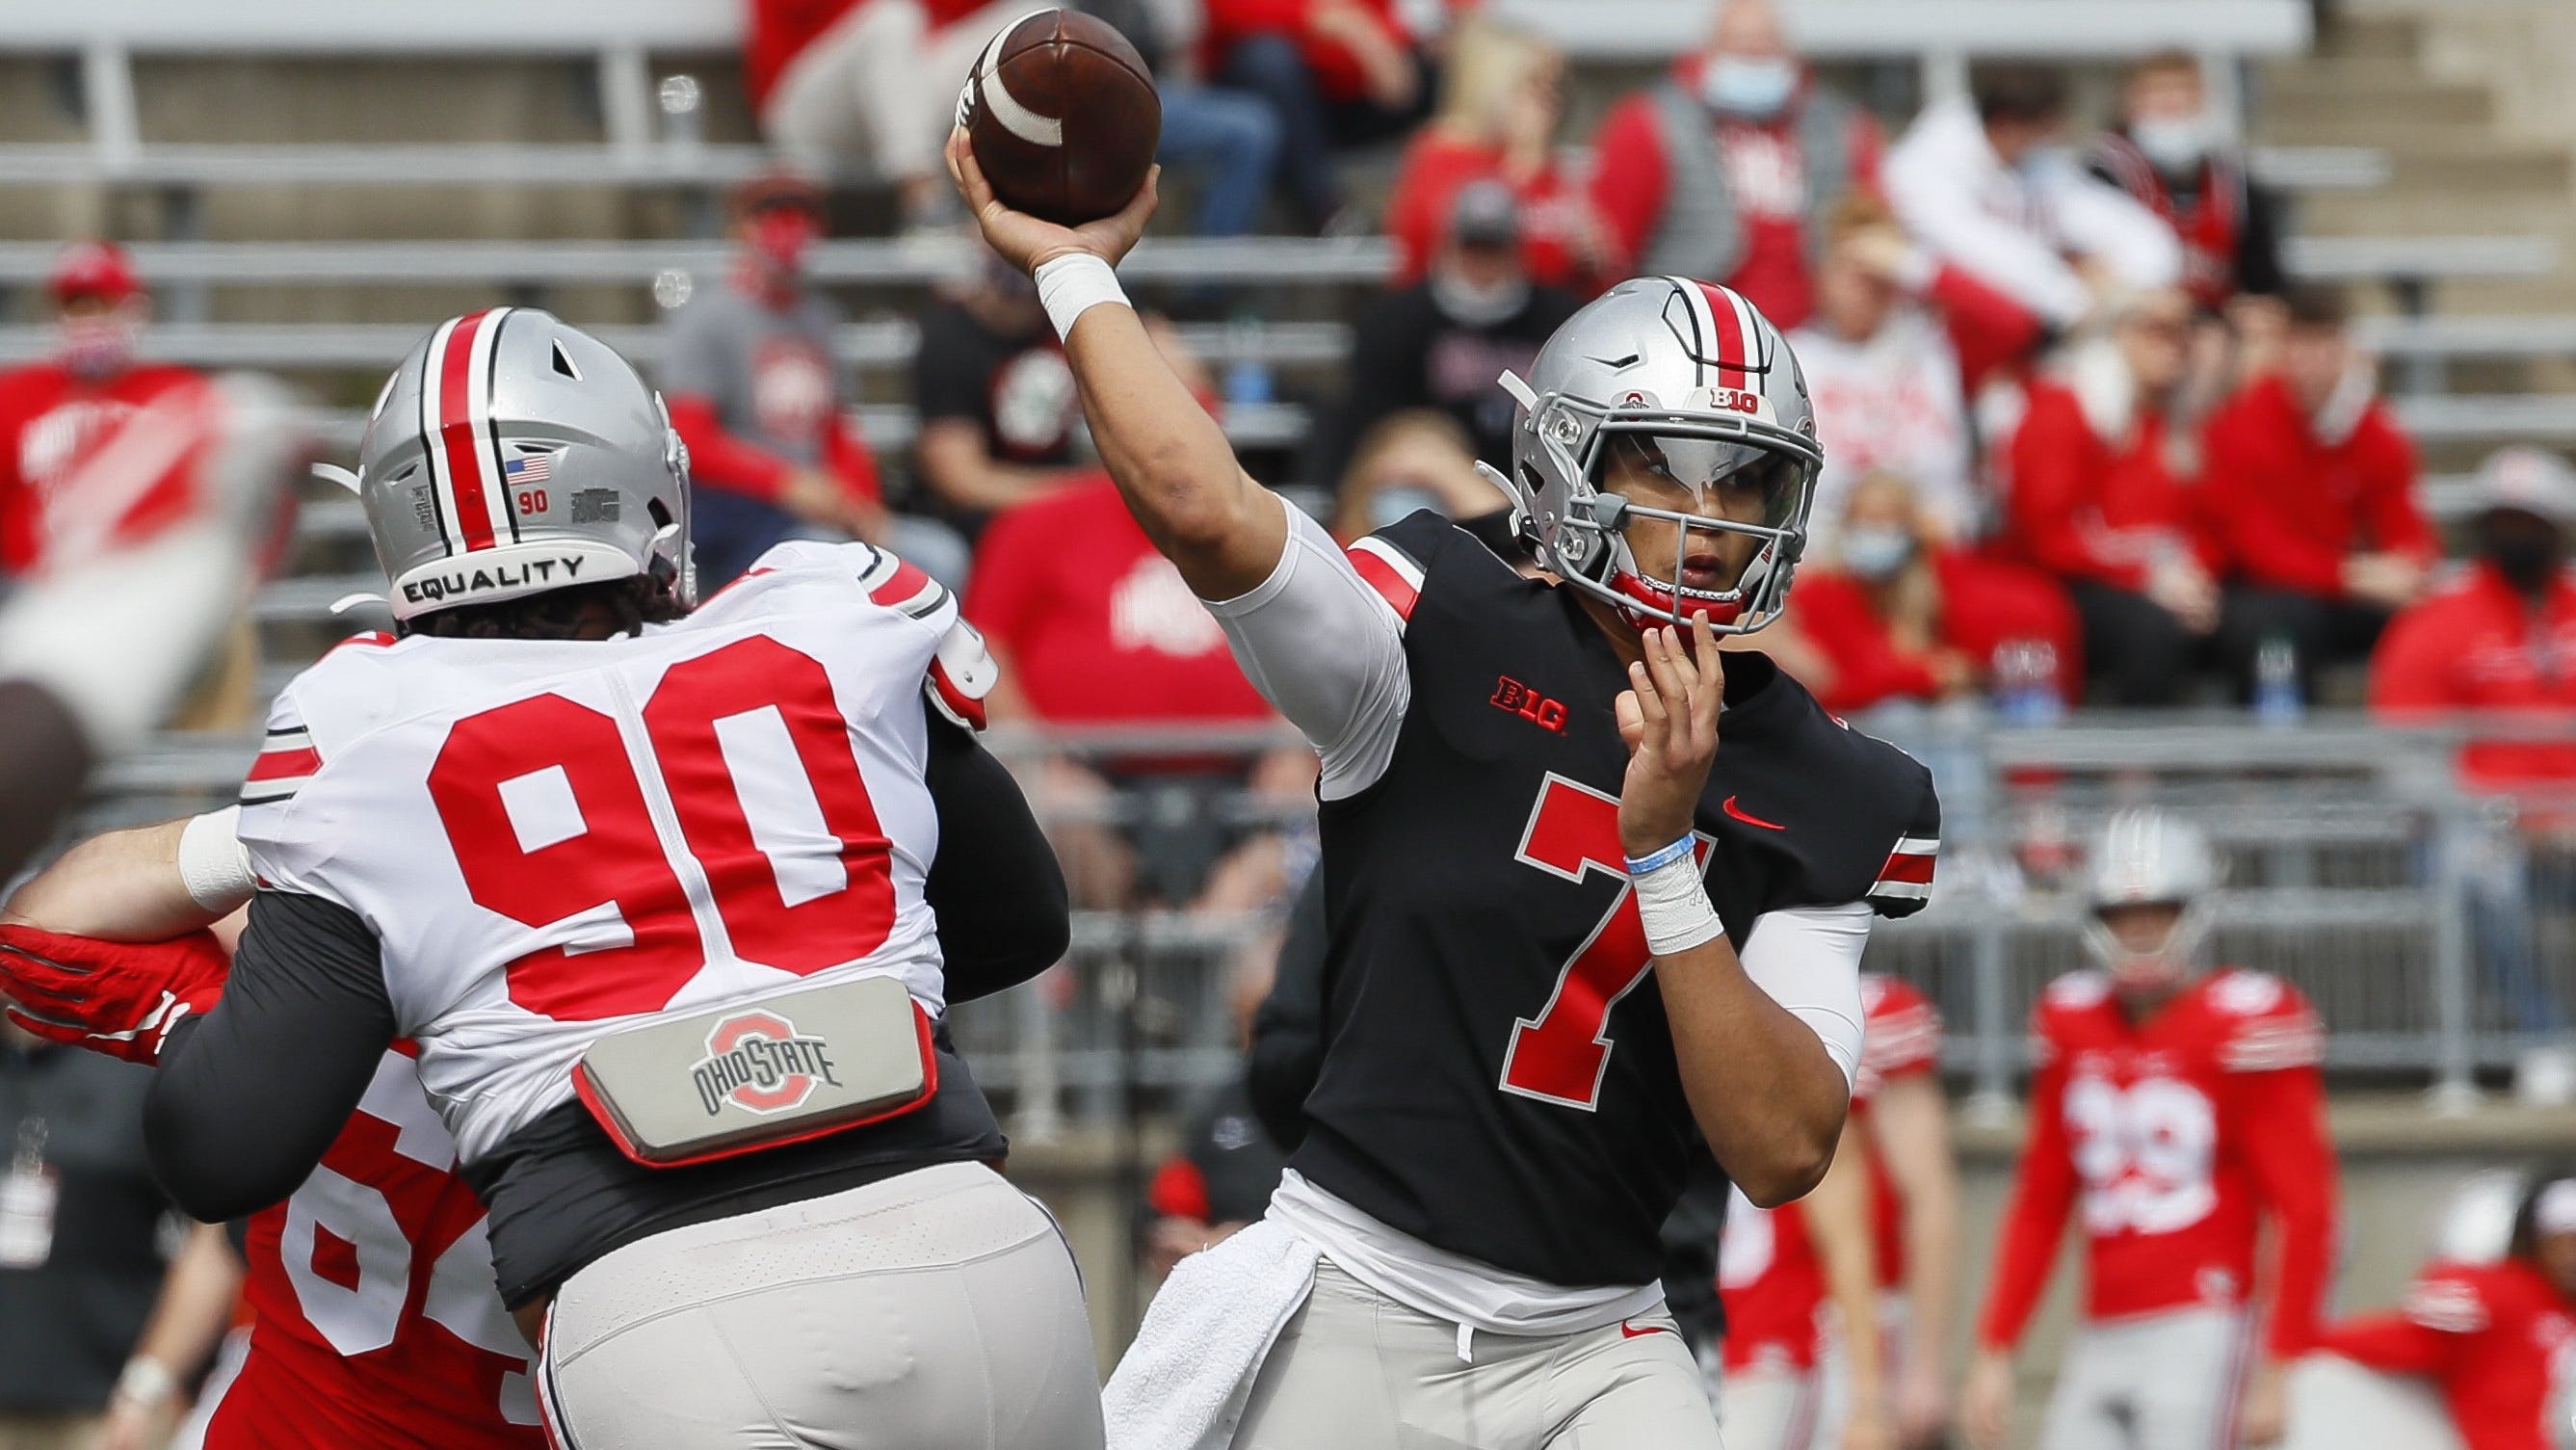 Who is the Ohio State quarterback in 2021? It's C.J. Stroud